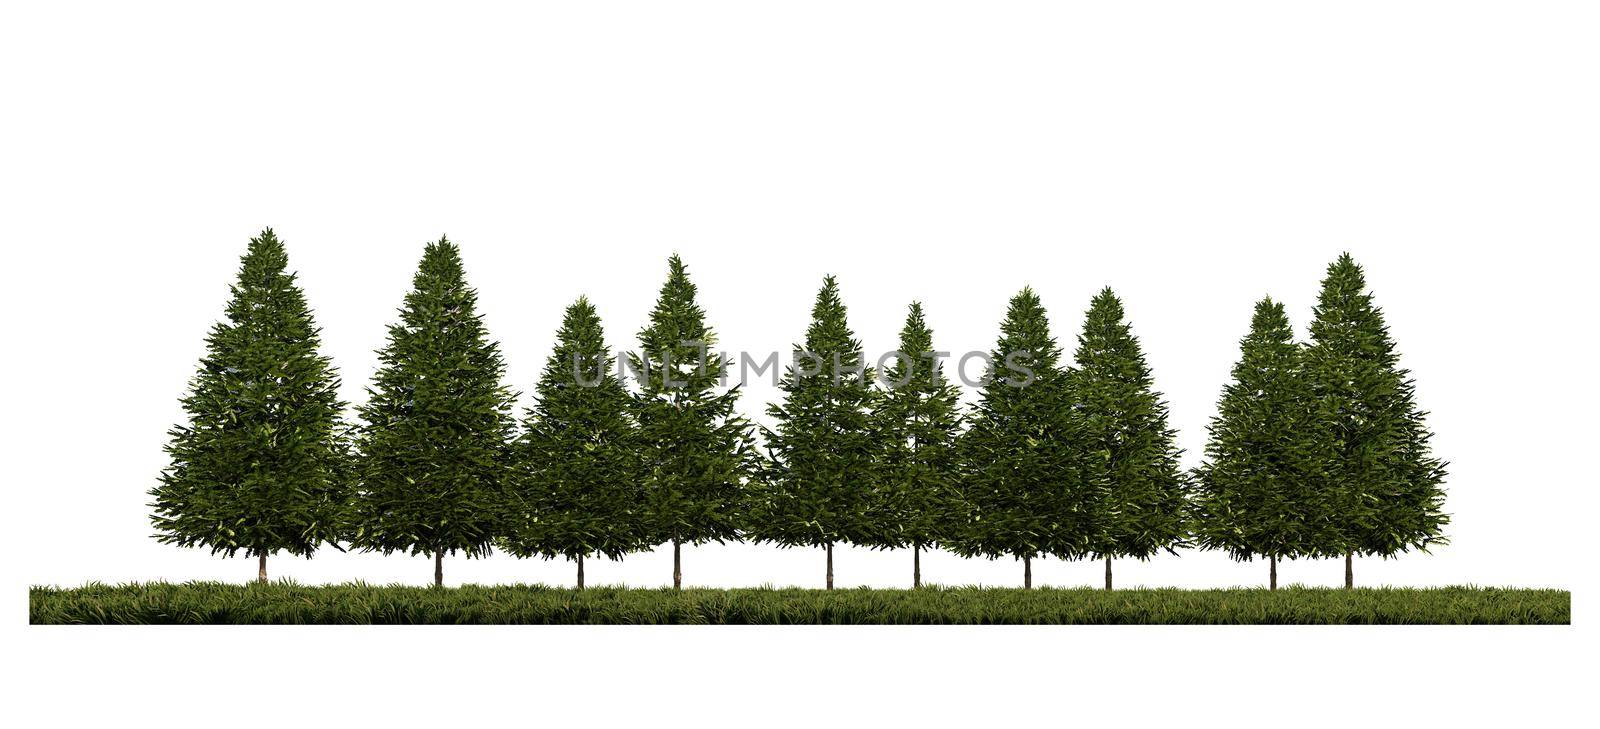 3ds rendering image of front view of pine trees on grasses field.